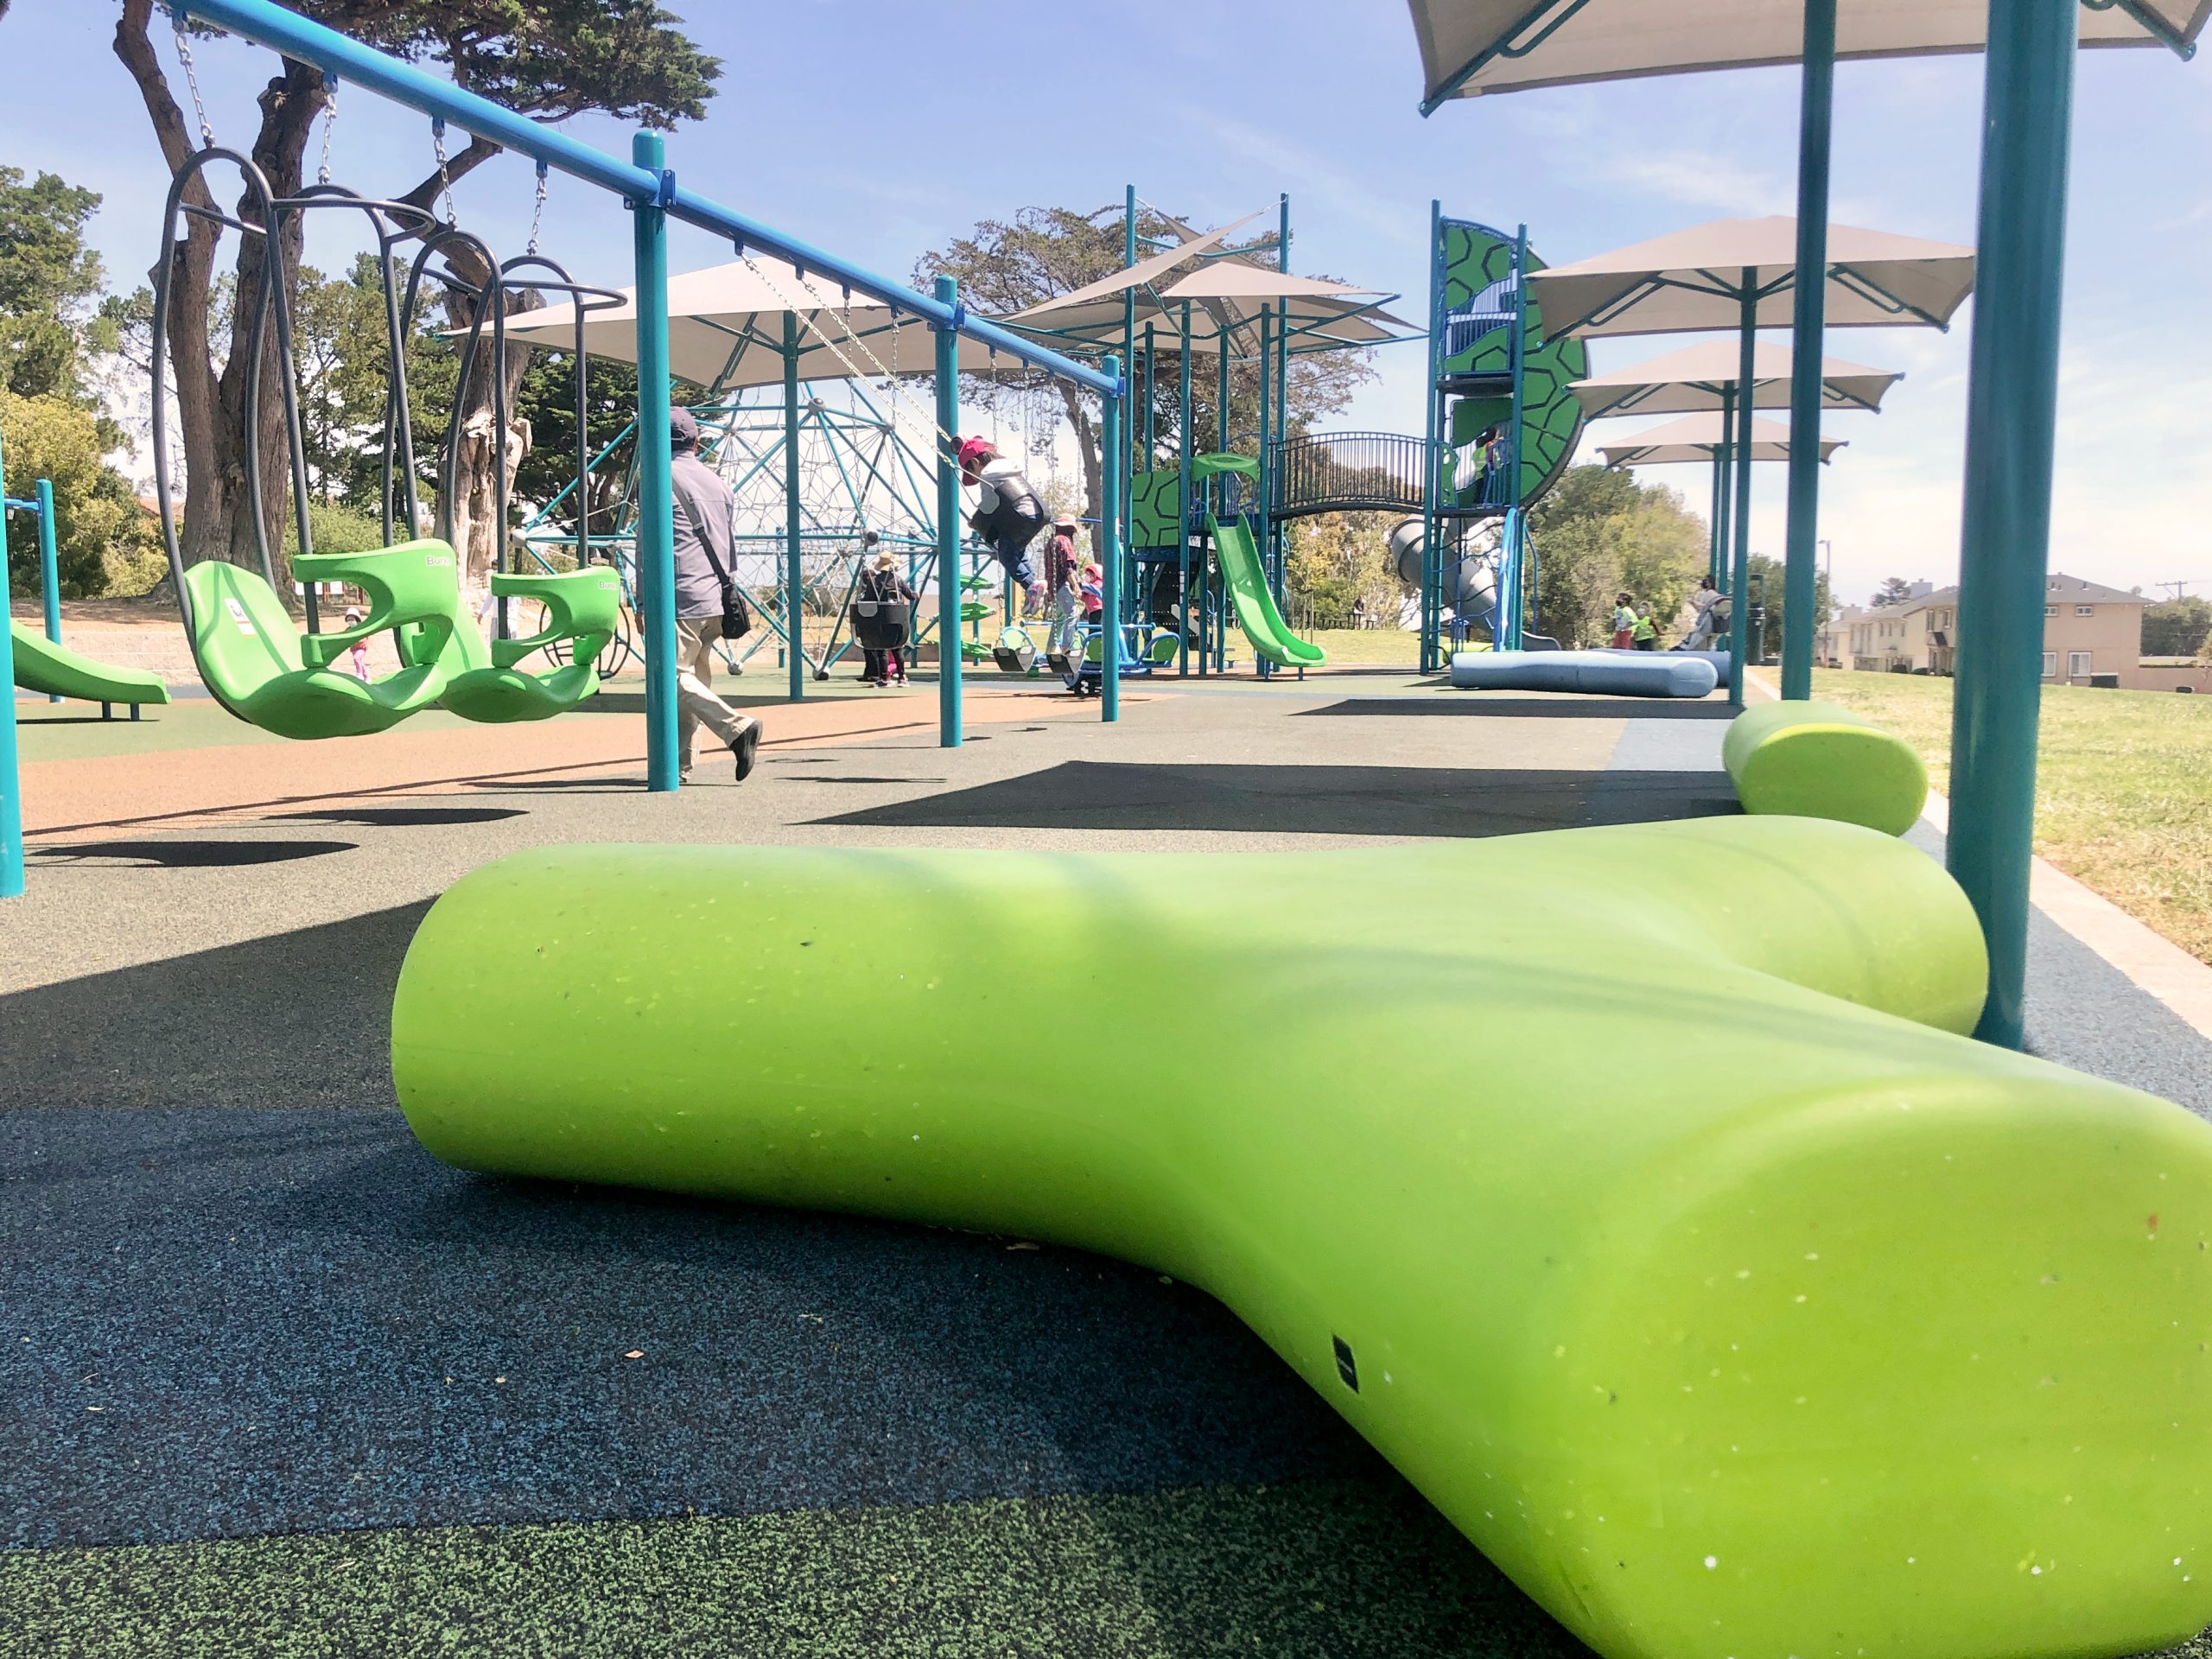 Furniture for public parks, USA. Designed and manufactured by Durbanis (Barcelona)